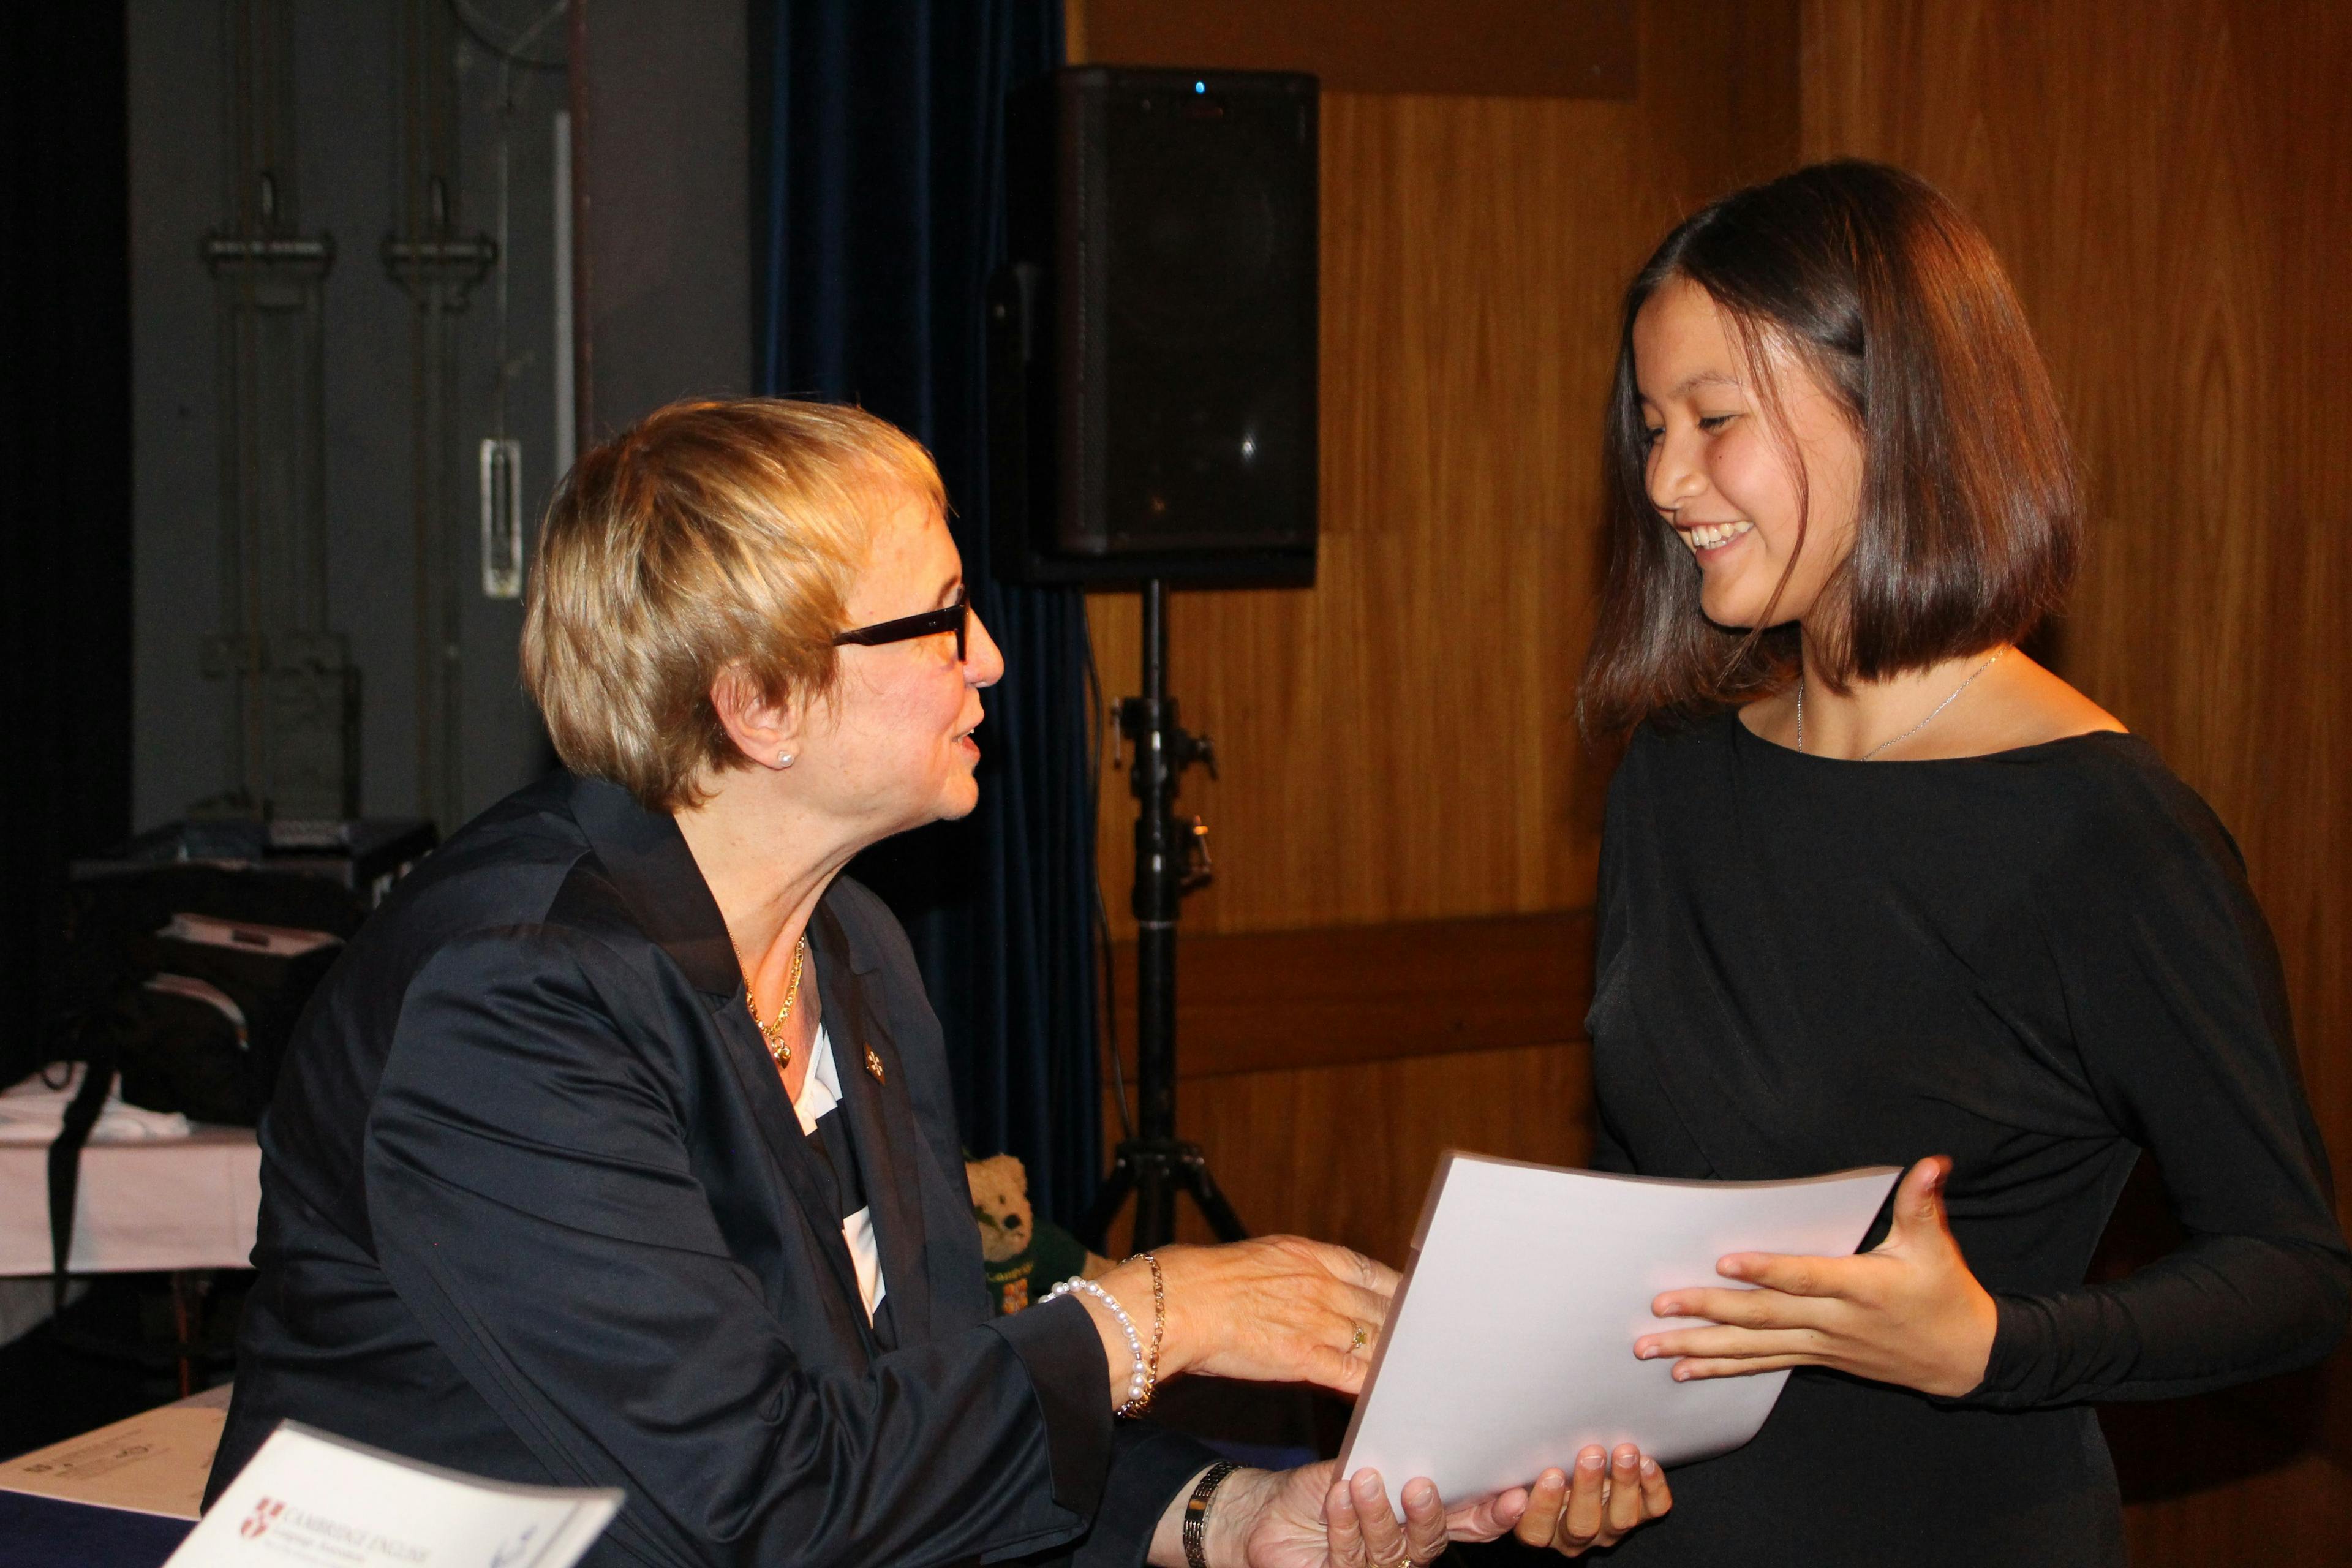 Swiss Exams former CEO Lori Kaithan hands out a language certificate to a student. They shake hands because the student passed the exam.